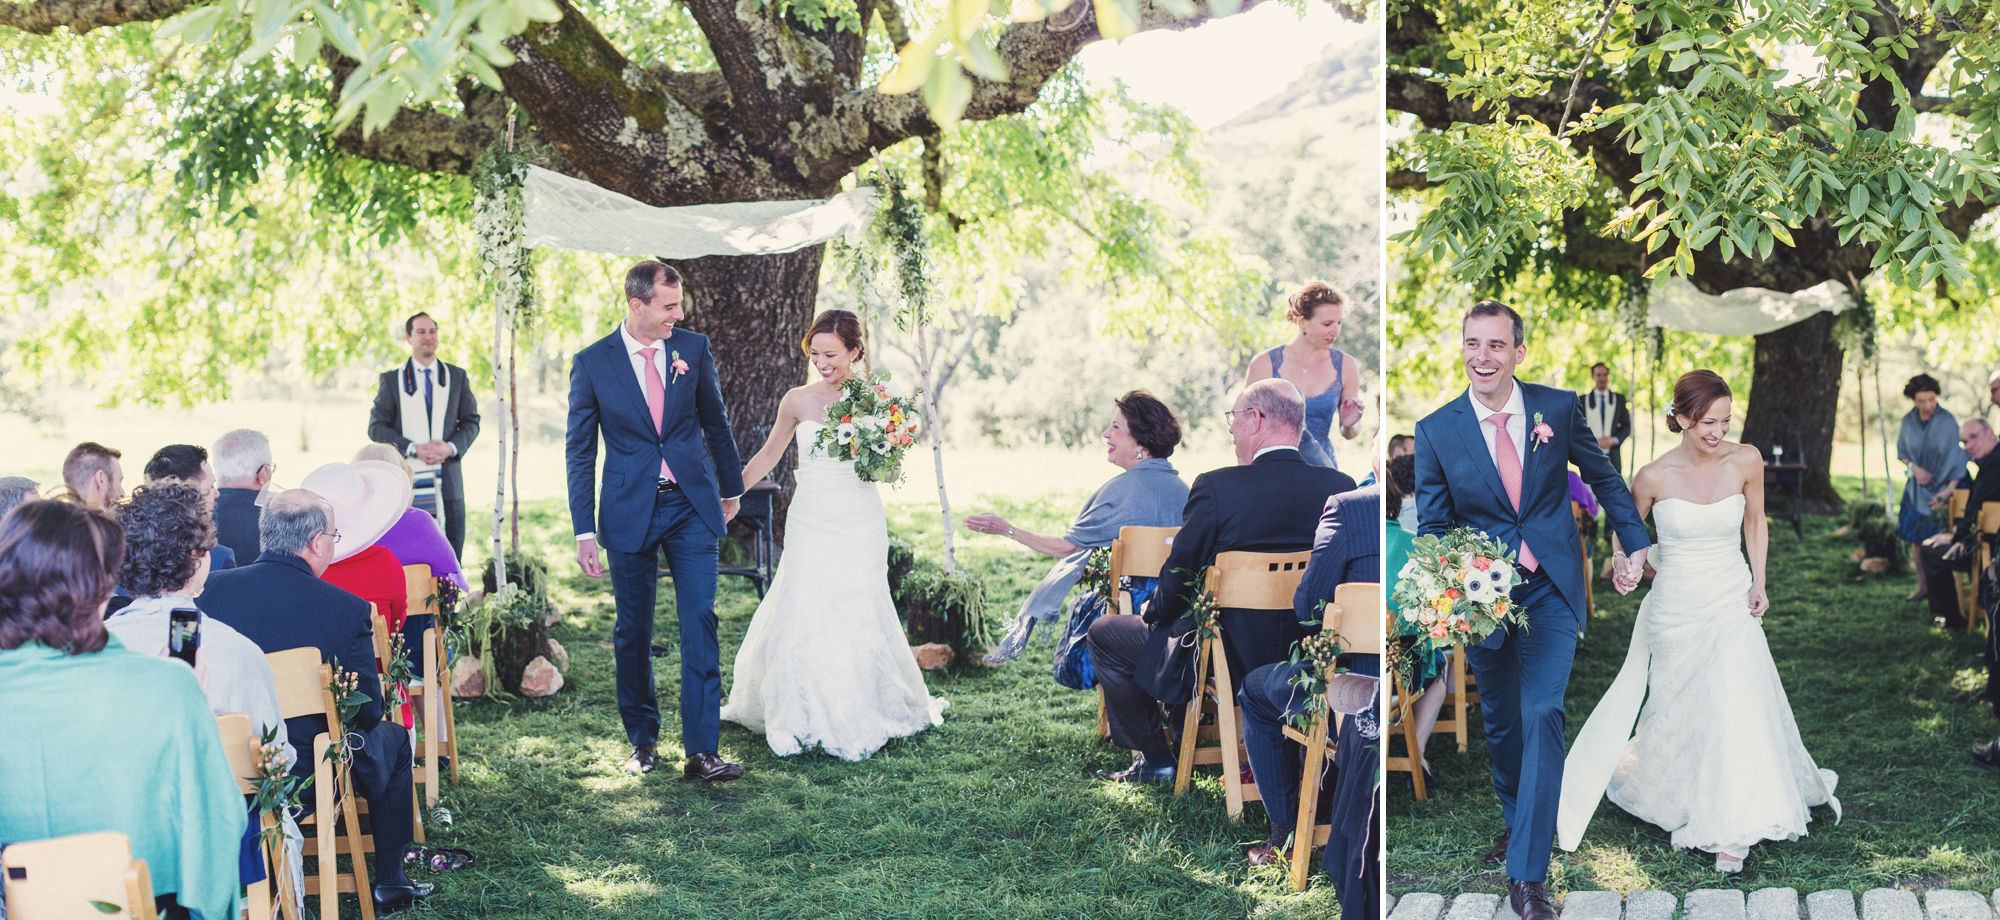 Triple S Ranch Wedding in Napa Valley @Anne-Claire Brun 0074